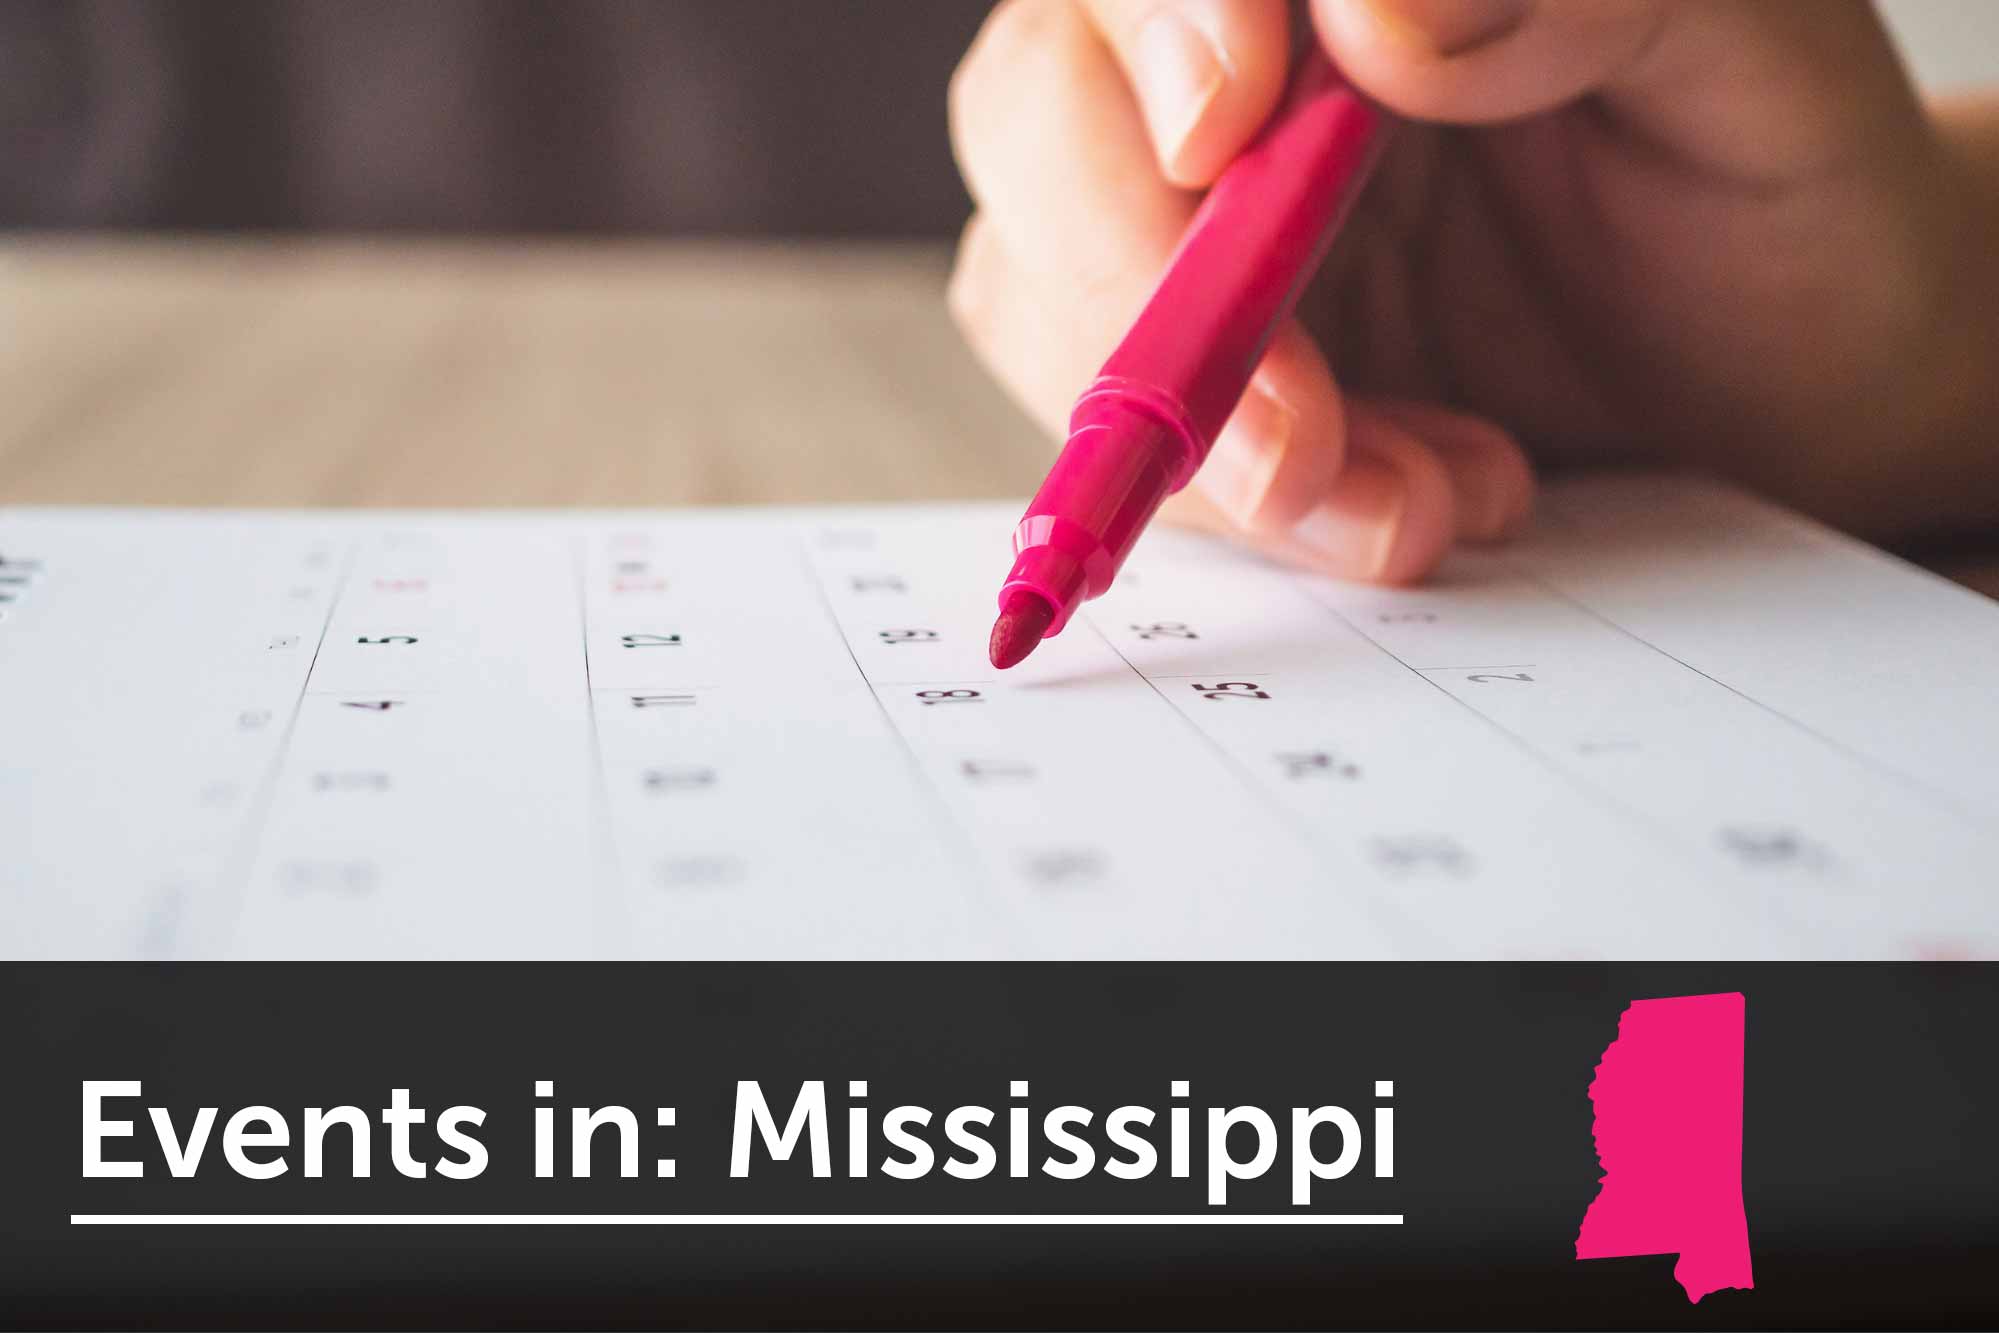 Women's business events in Mississippi